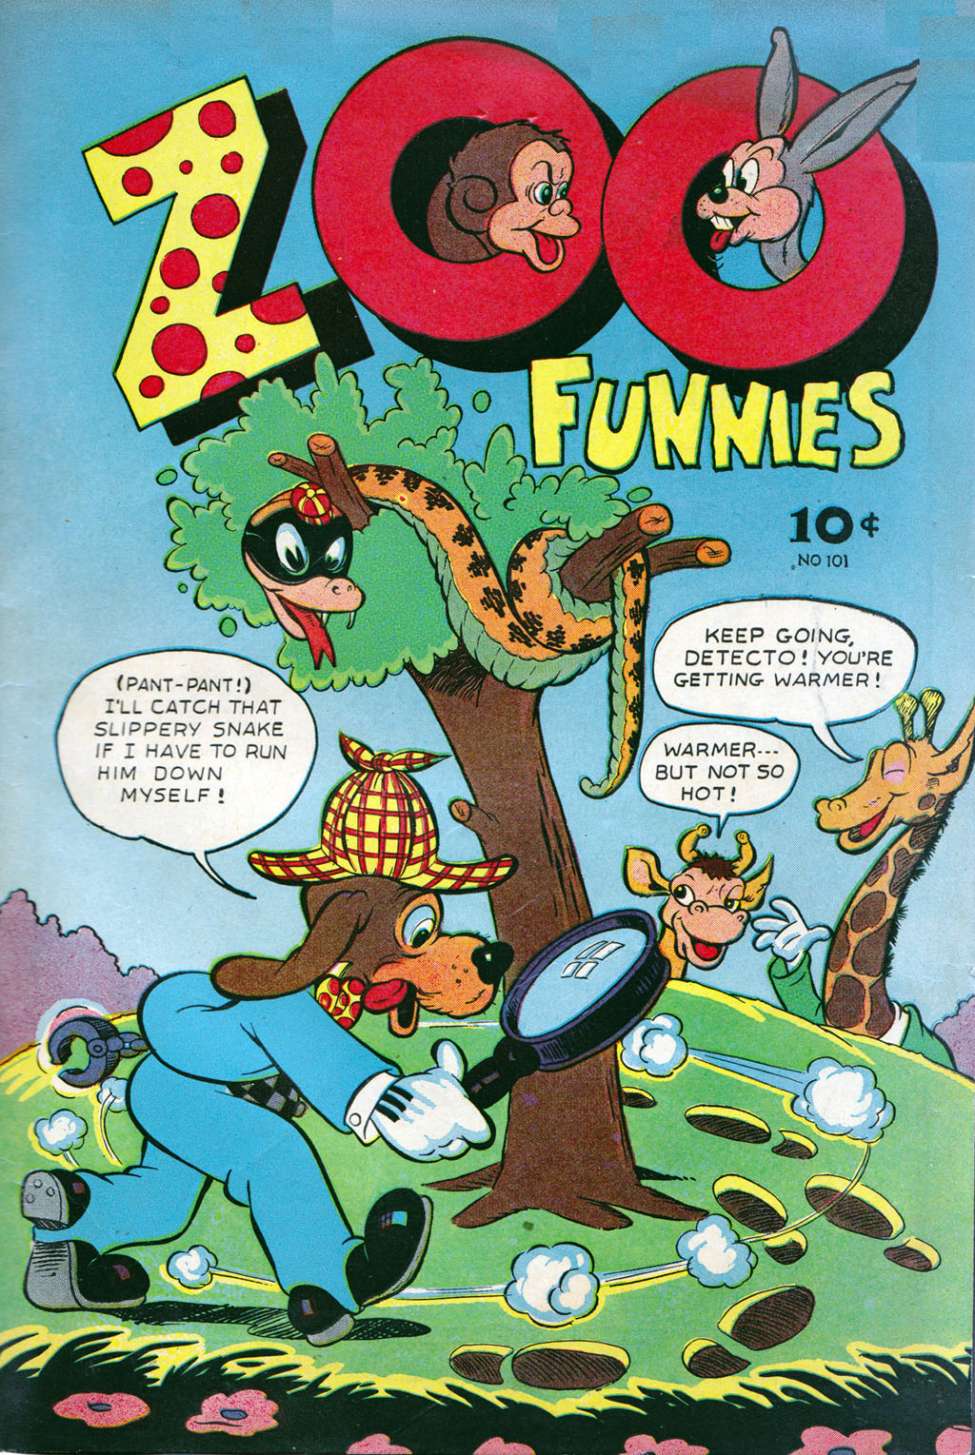 Book Cover For Zoo Funnies v1 1